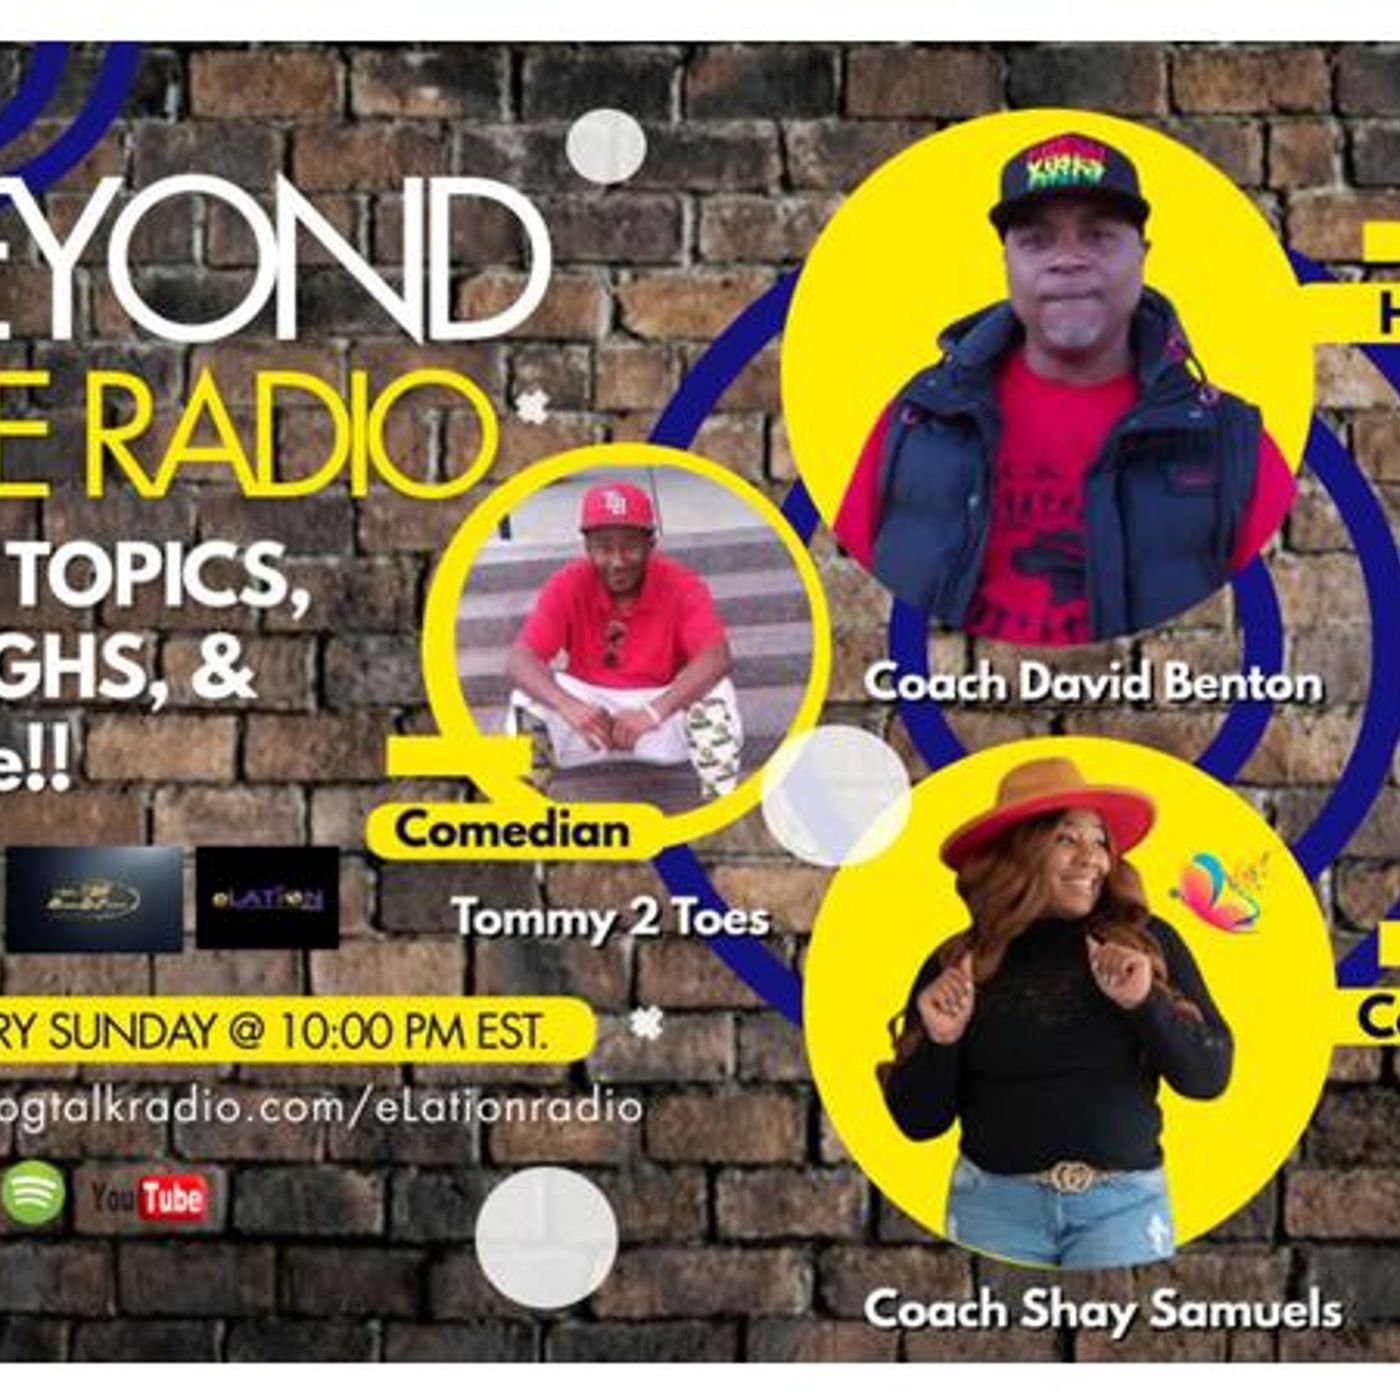 Beyond Da Radio with Coach Shay, Tommy 2 Toes and Coach David Benton